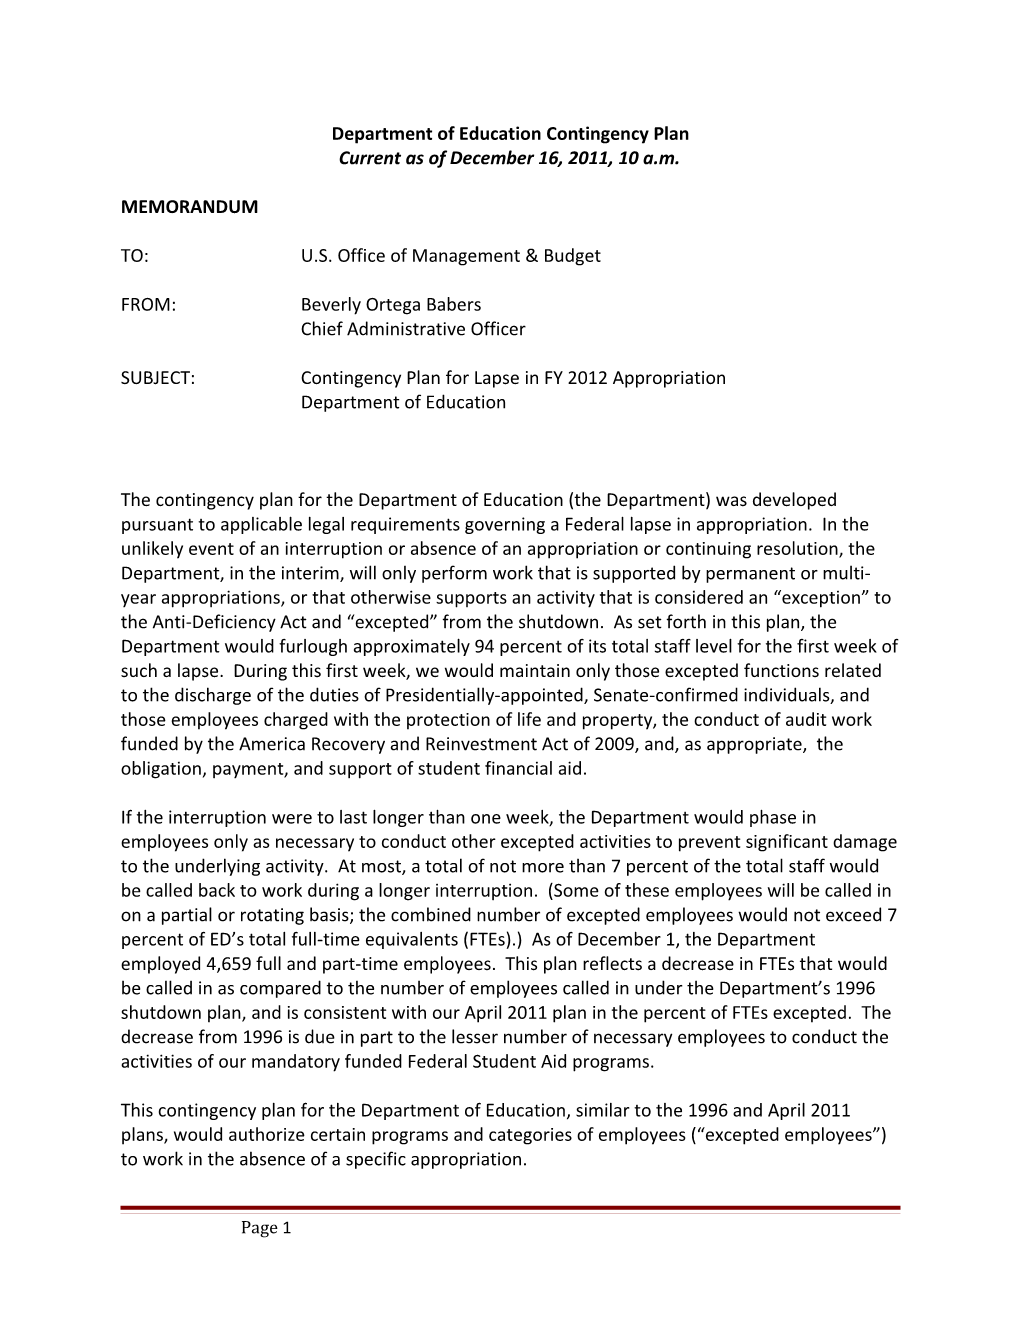 Contingency Plan for Lapse in FY 2012 Appropriation Department of Education December 16